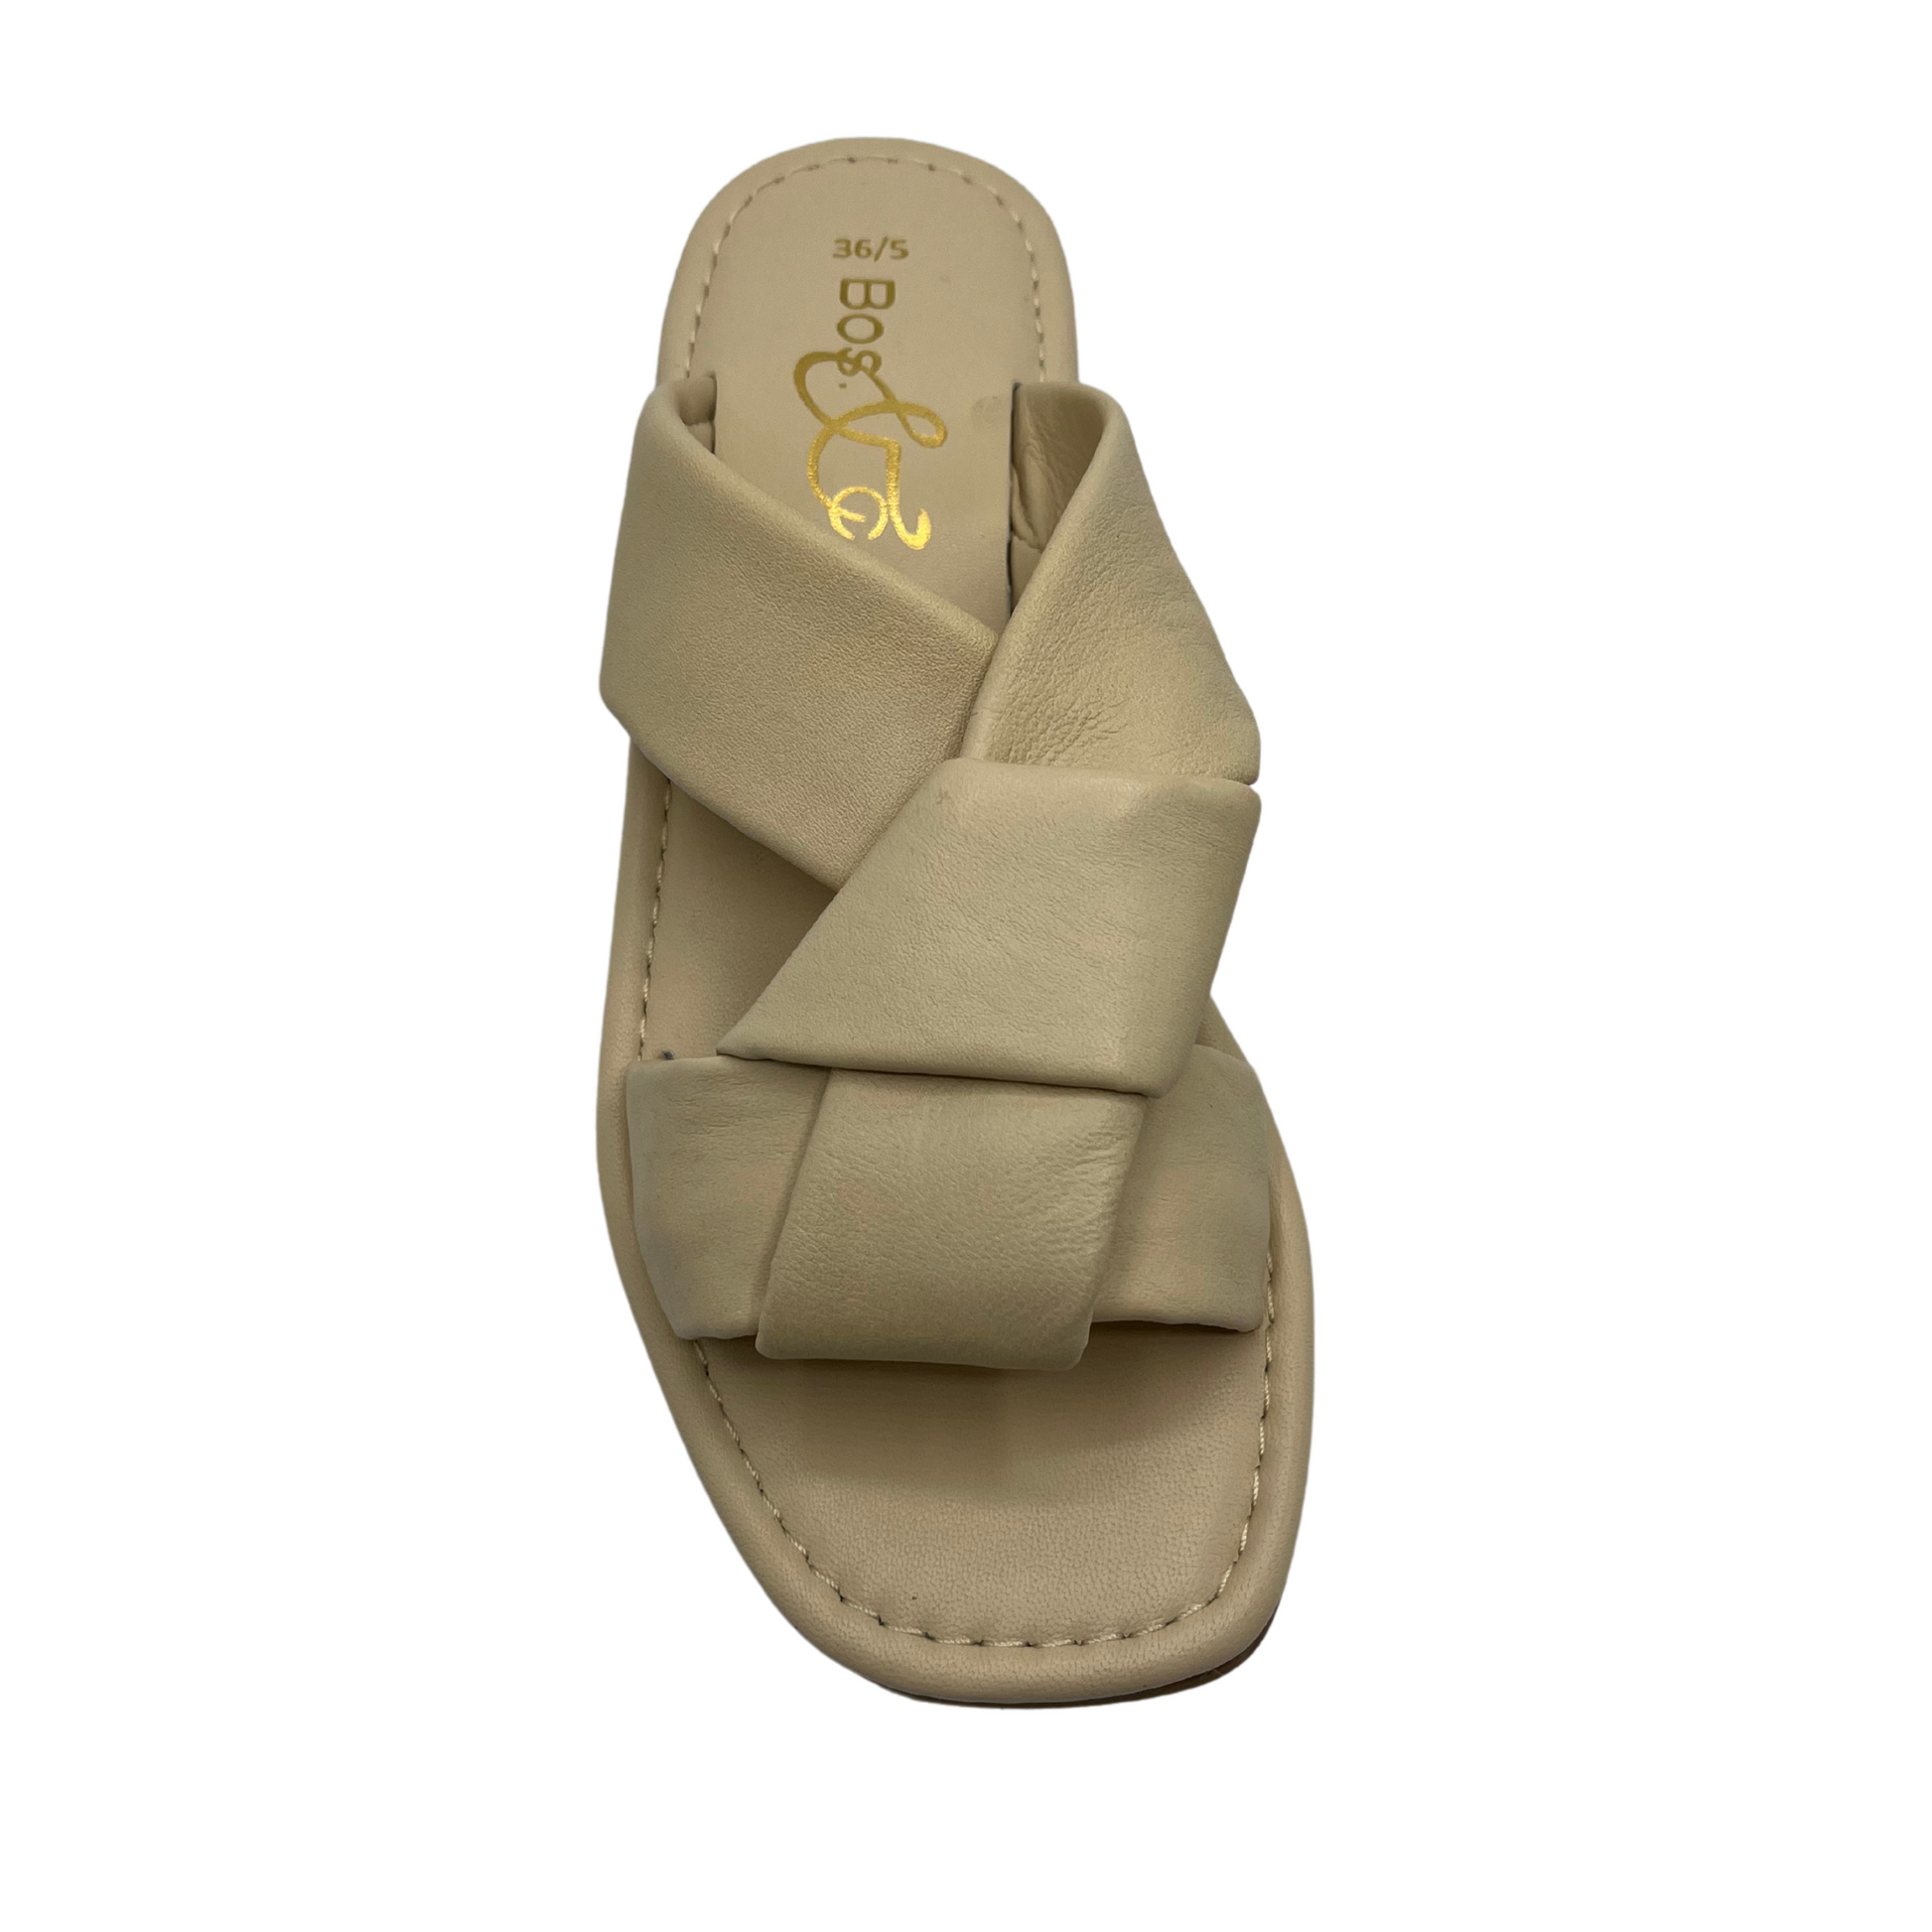 Top view of cream leather sandal with short block heel and large knot detail on straps.